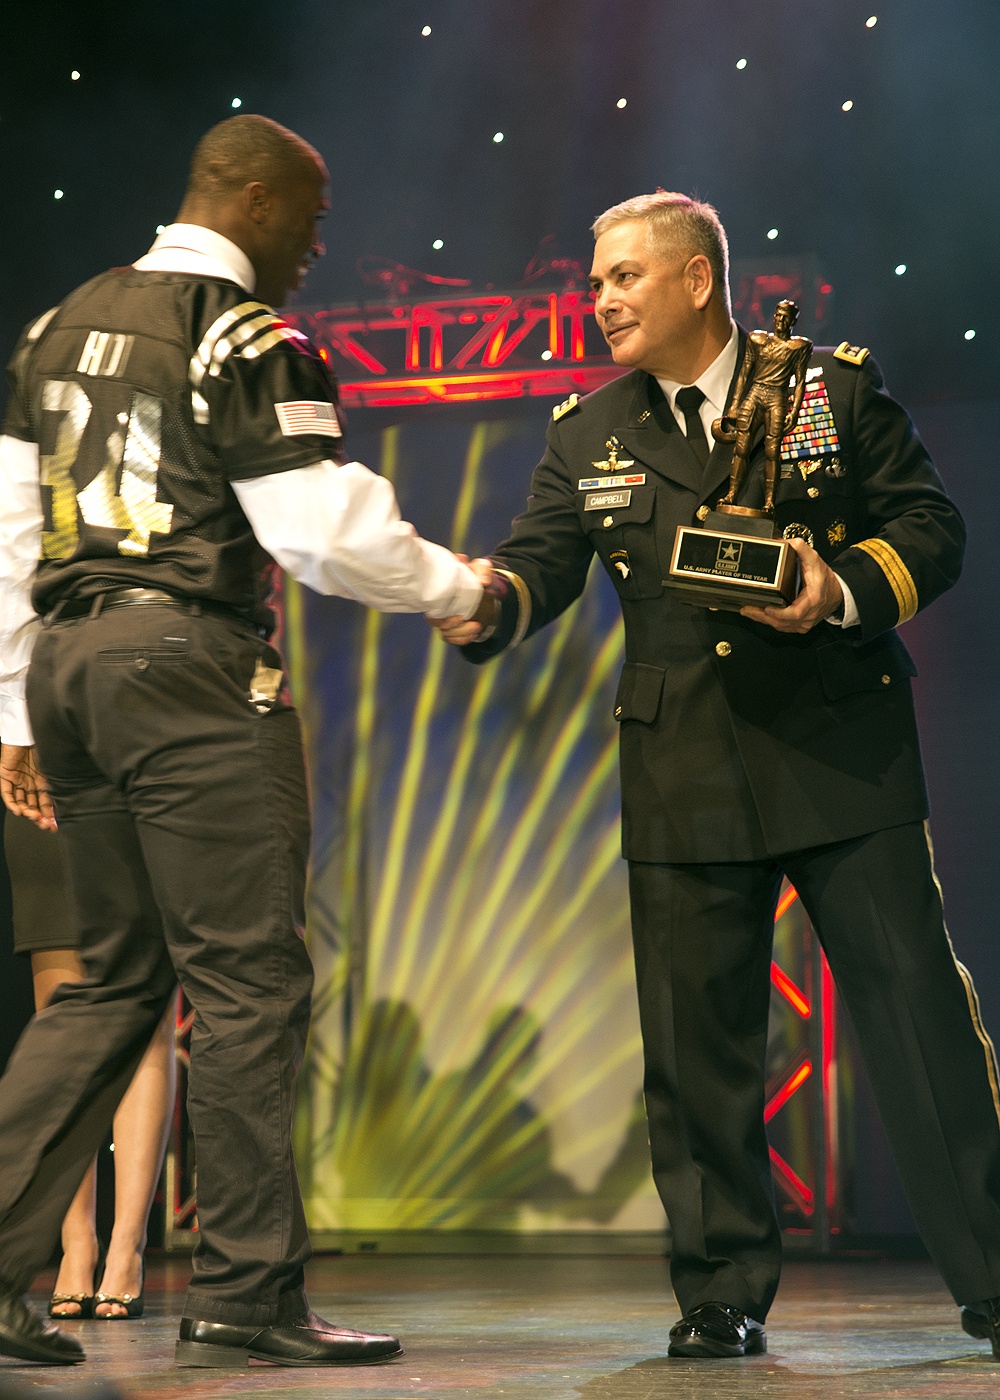 Vice chief congratulates Player of the Year